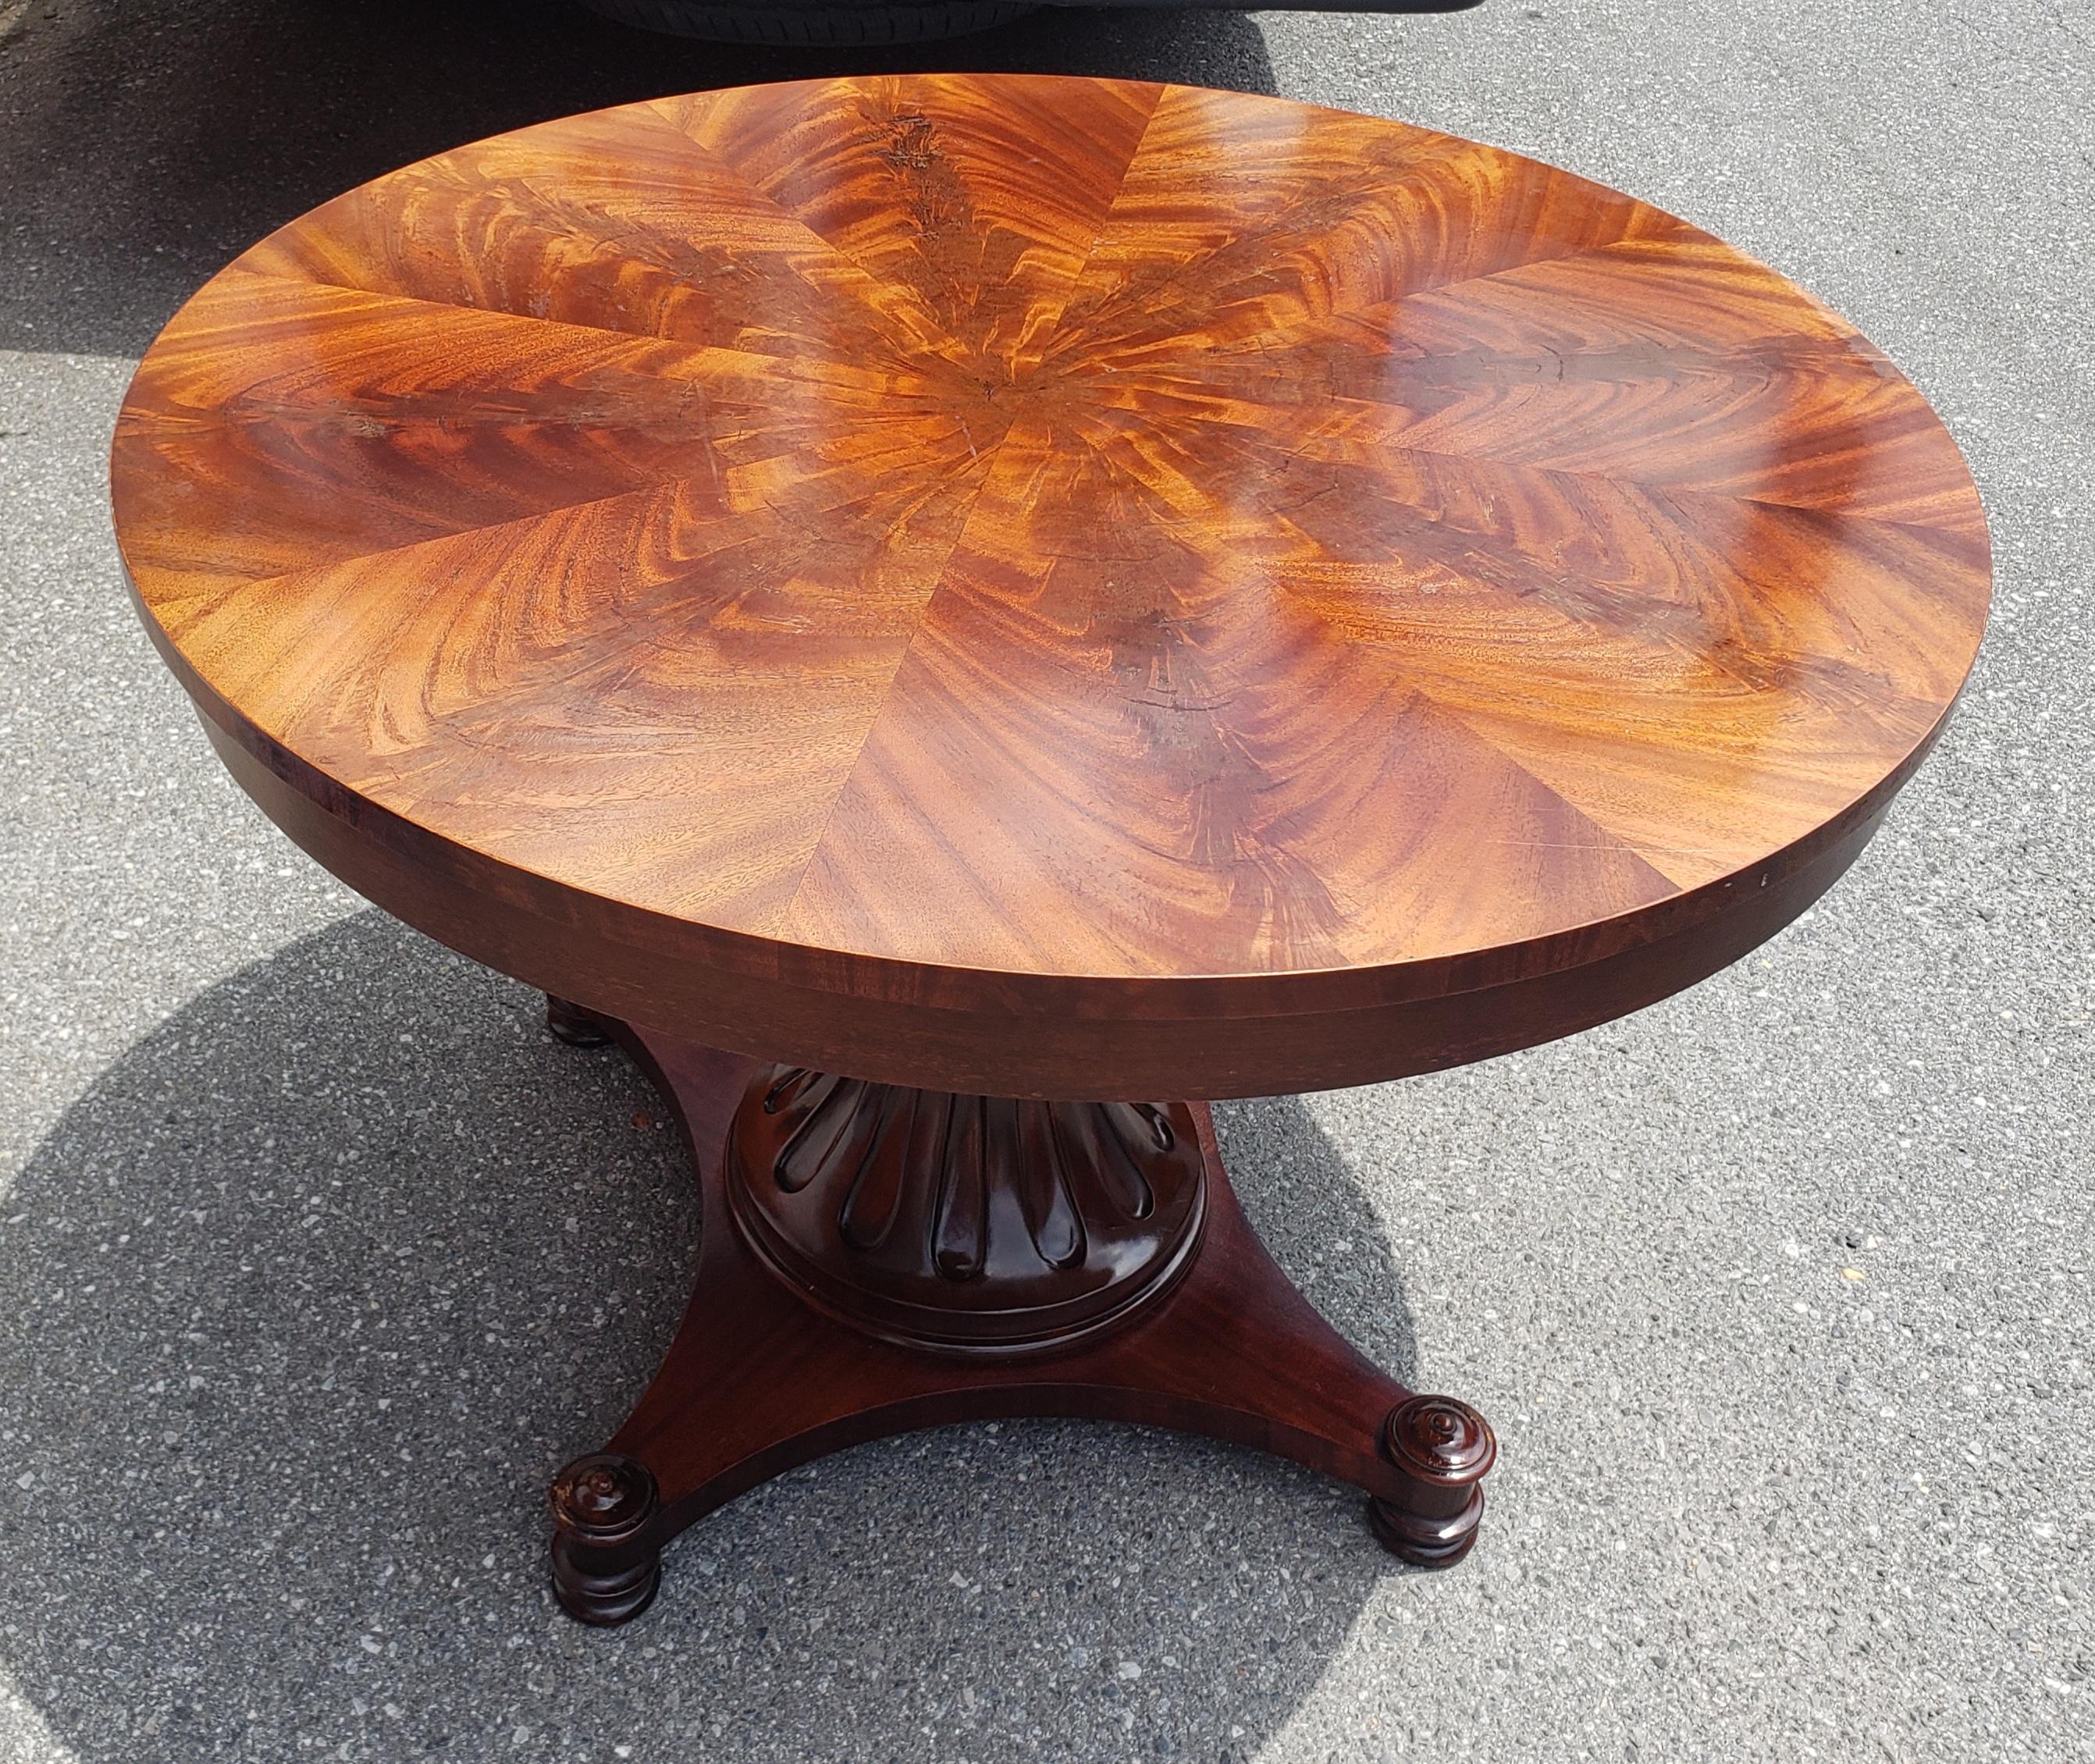 A beautiful late 20th Century Swirl medium finish mahogany with quadpod reeled pedestal. Flamed bookmatched top. Measures 44